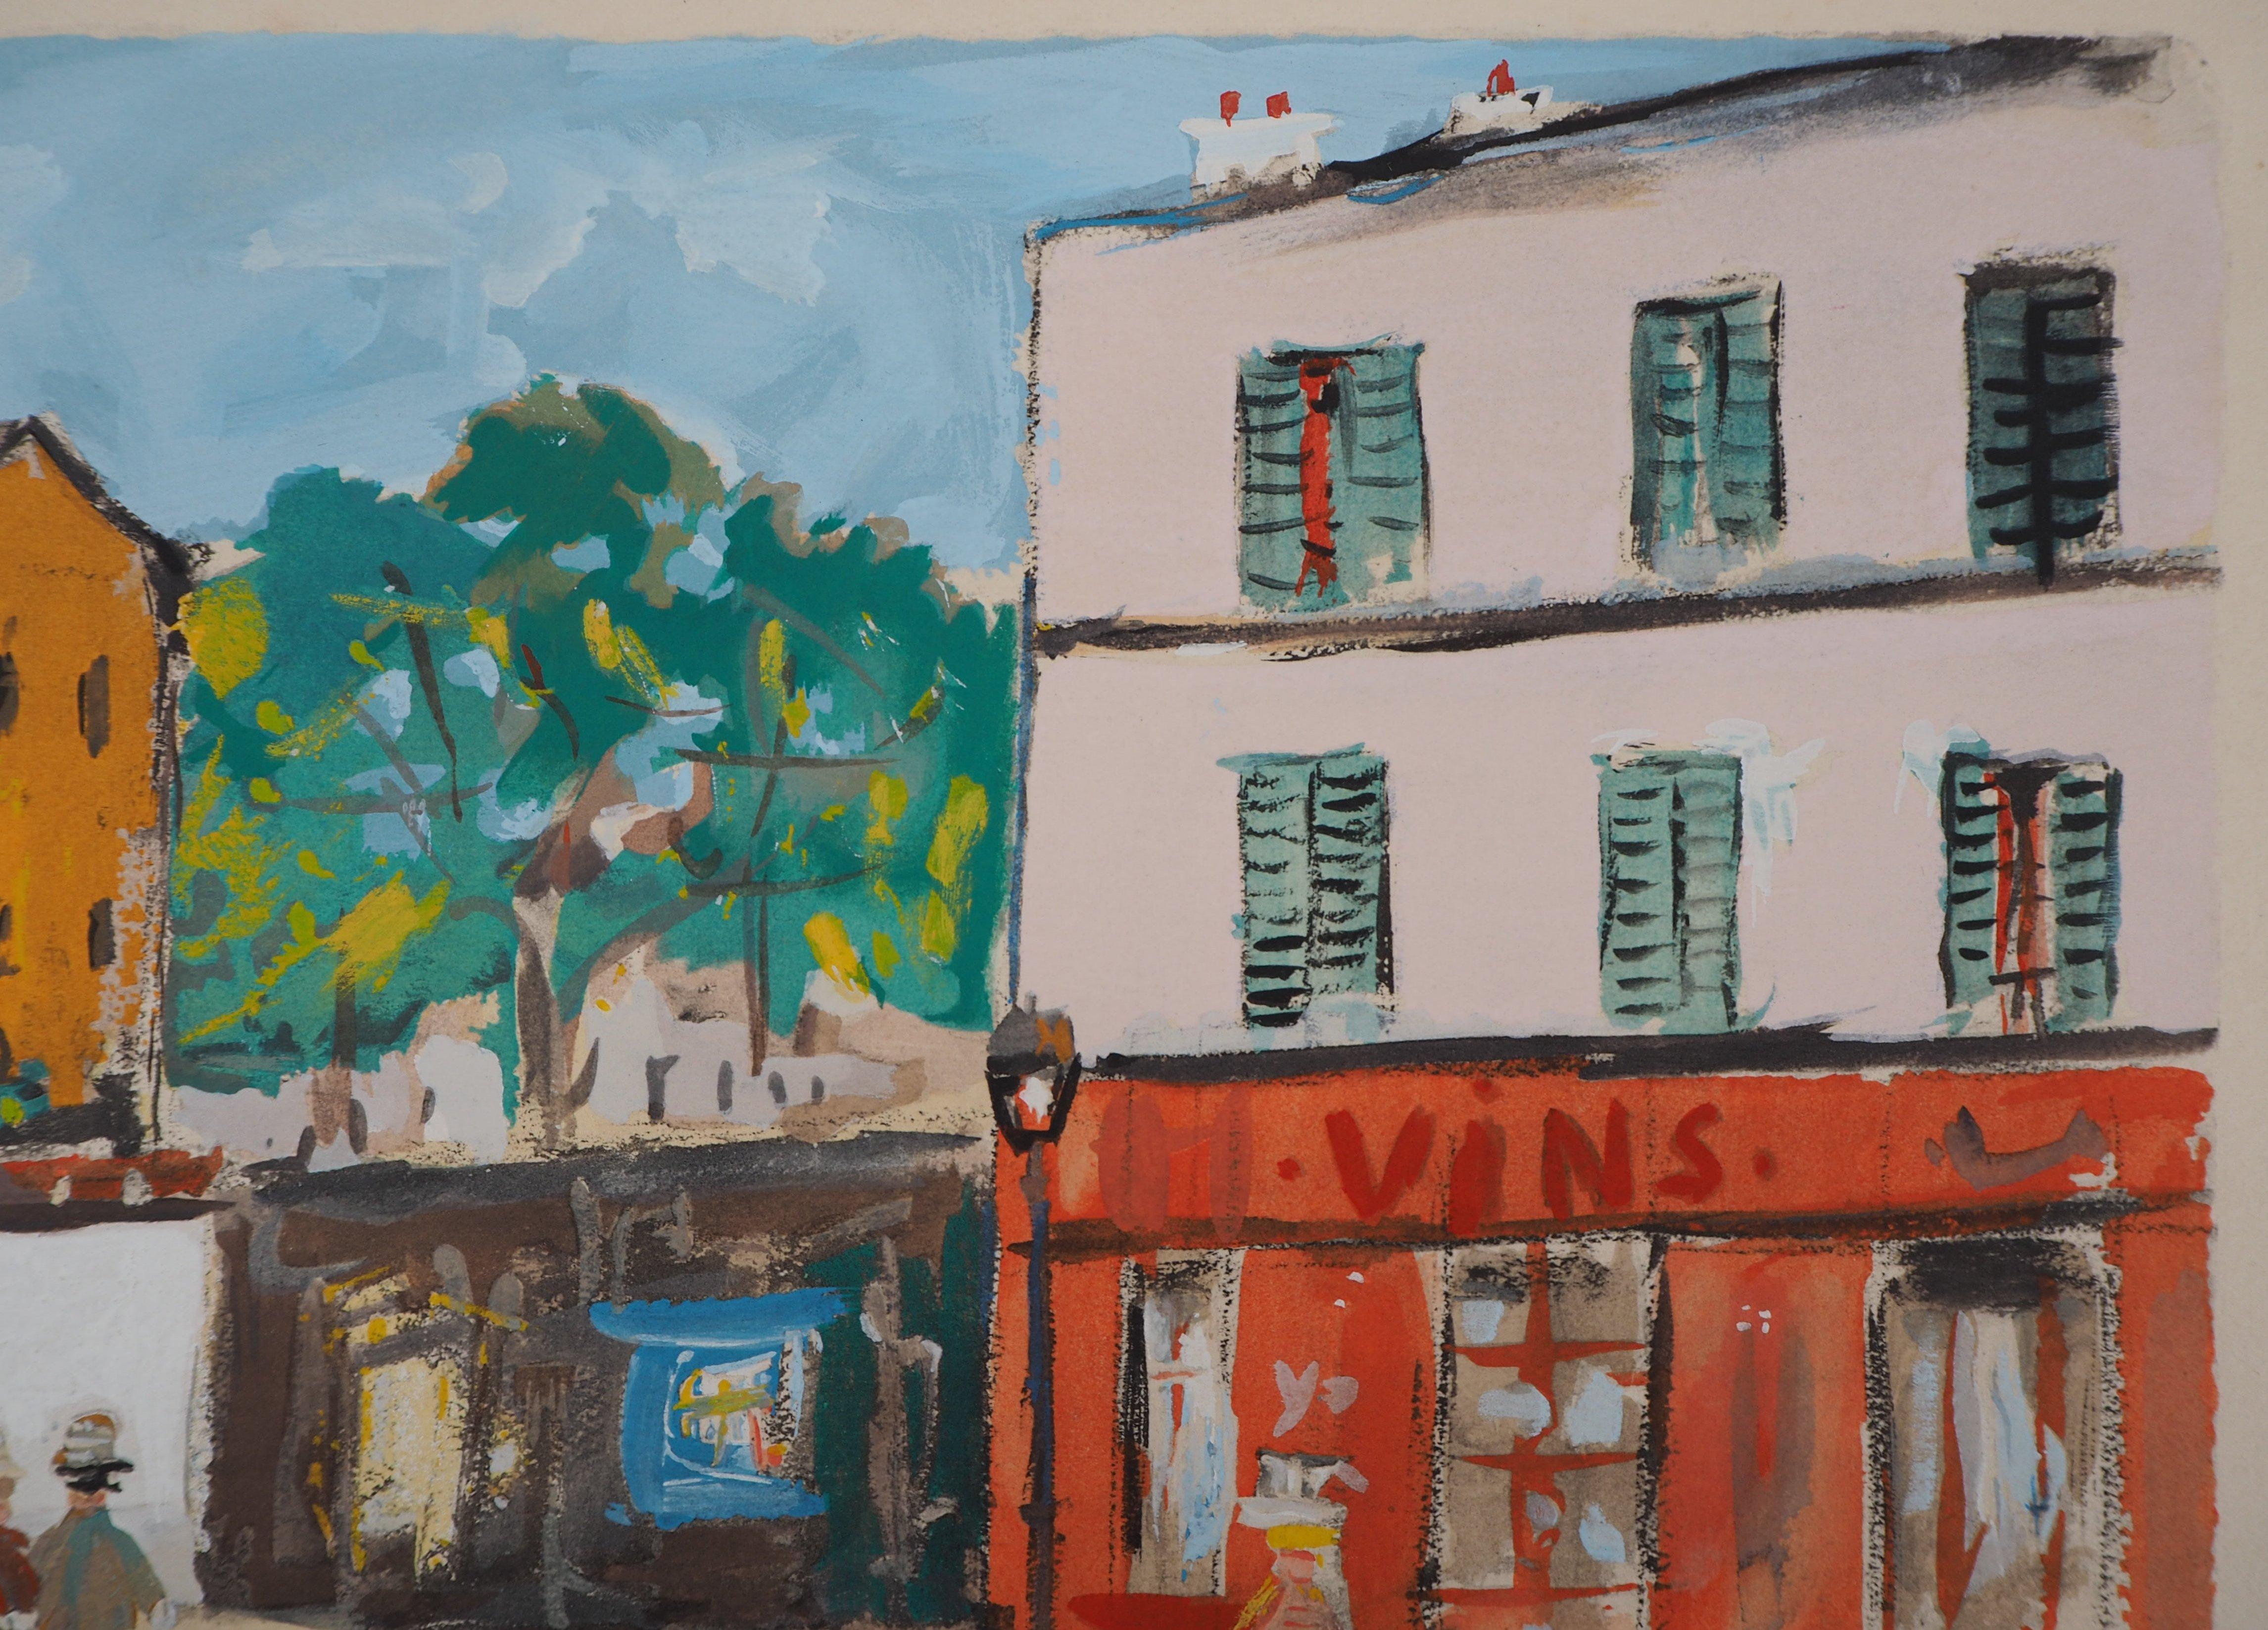 Cabaret in Montmartre - Original Lithograph - Modern Print by Maurice Utrillo